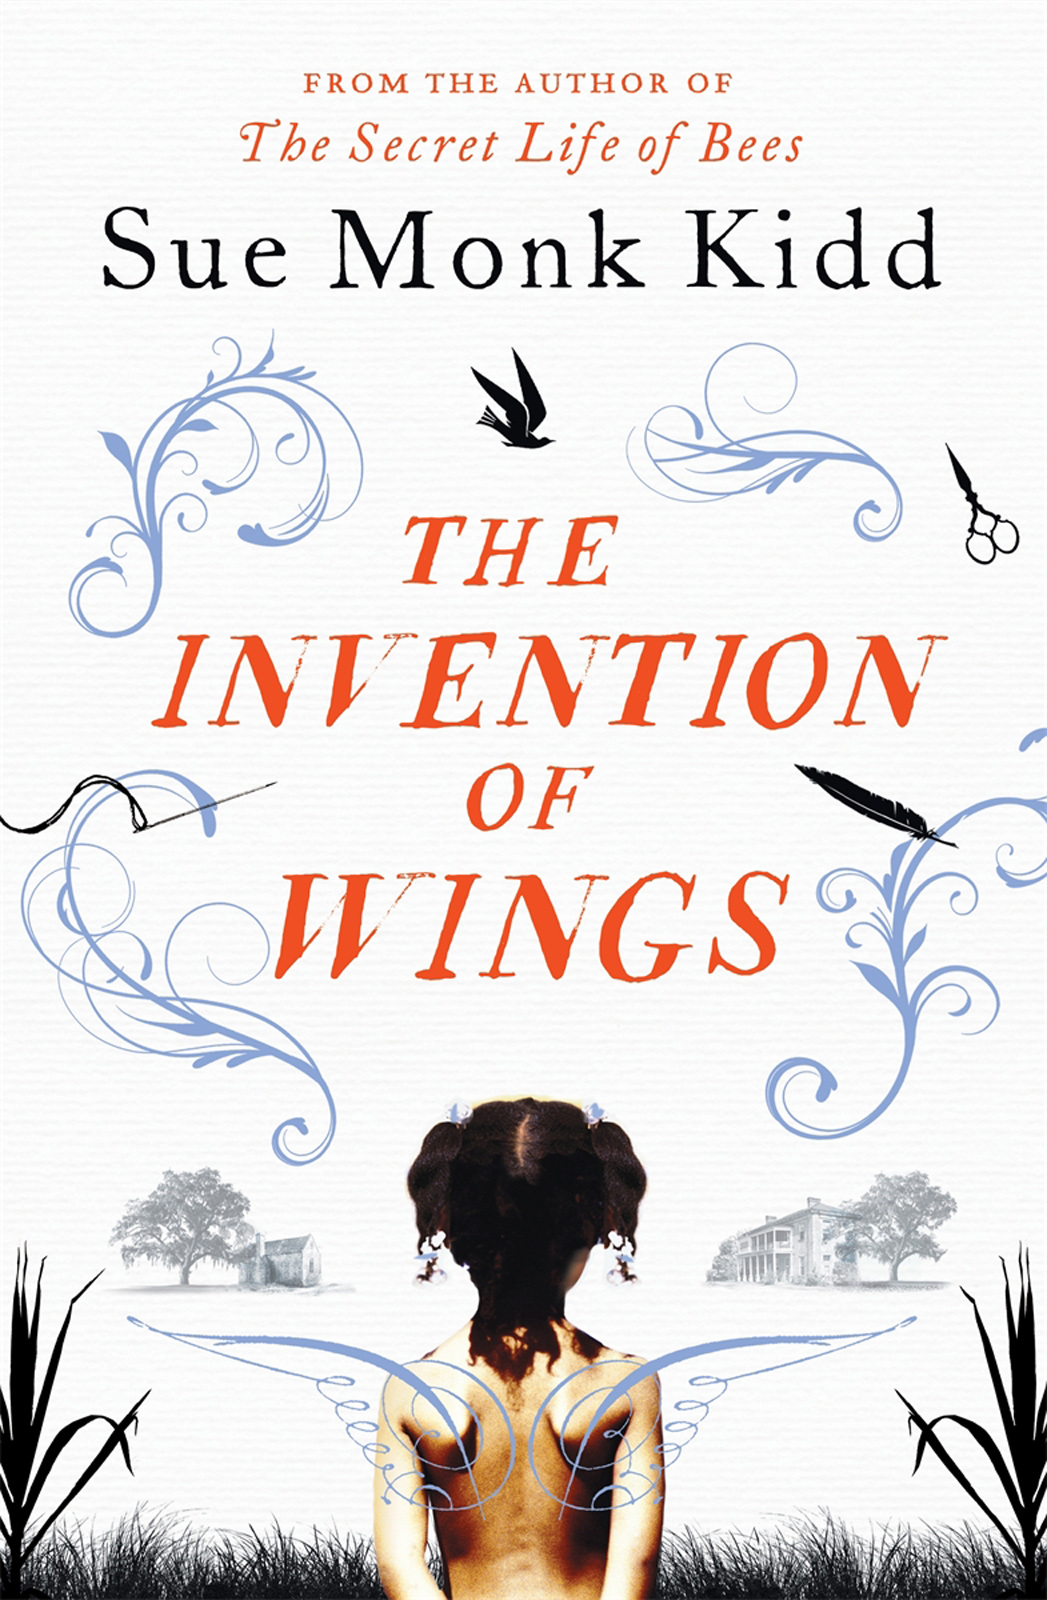 The Invention of Wings: A Novel by Sue Monk Kidd